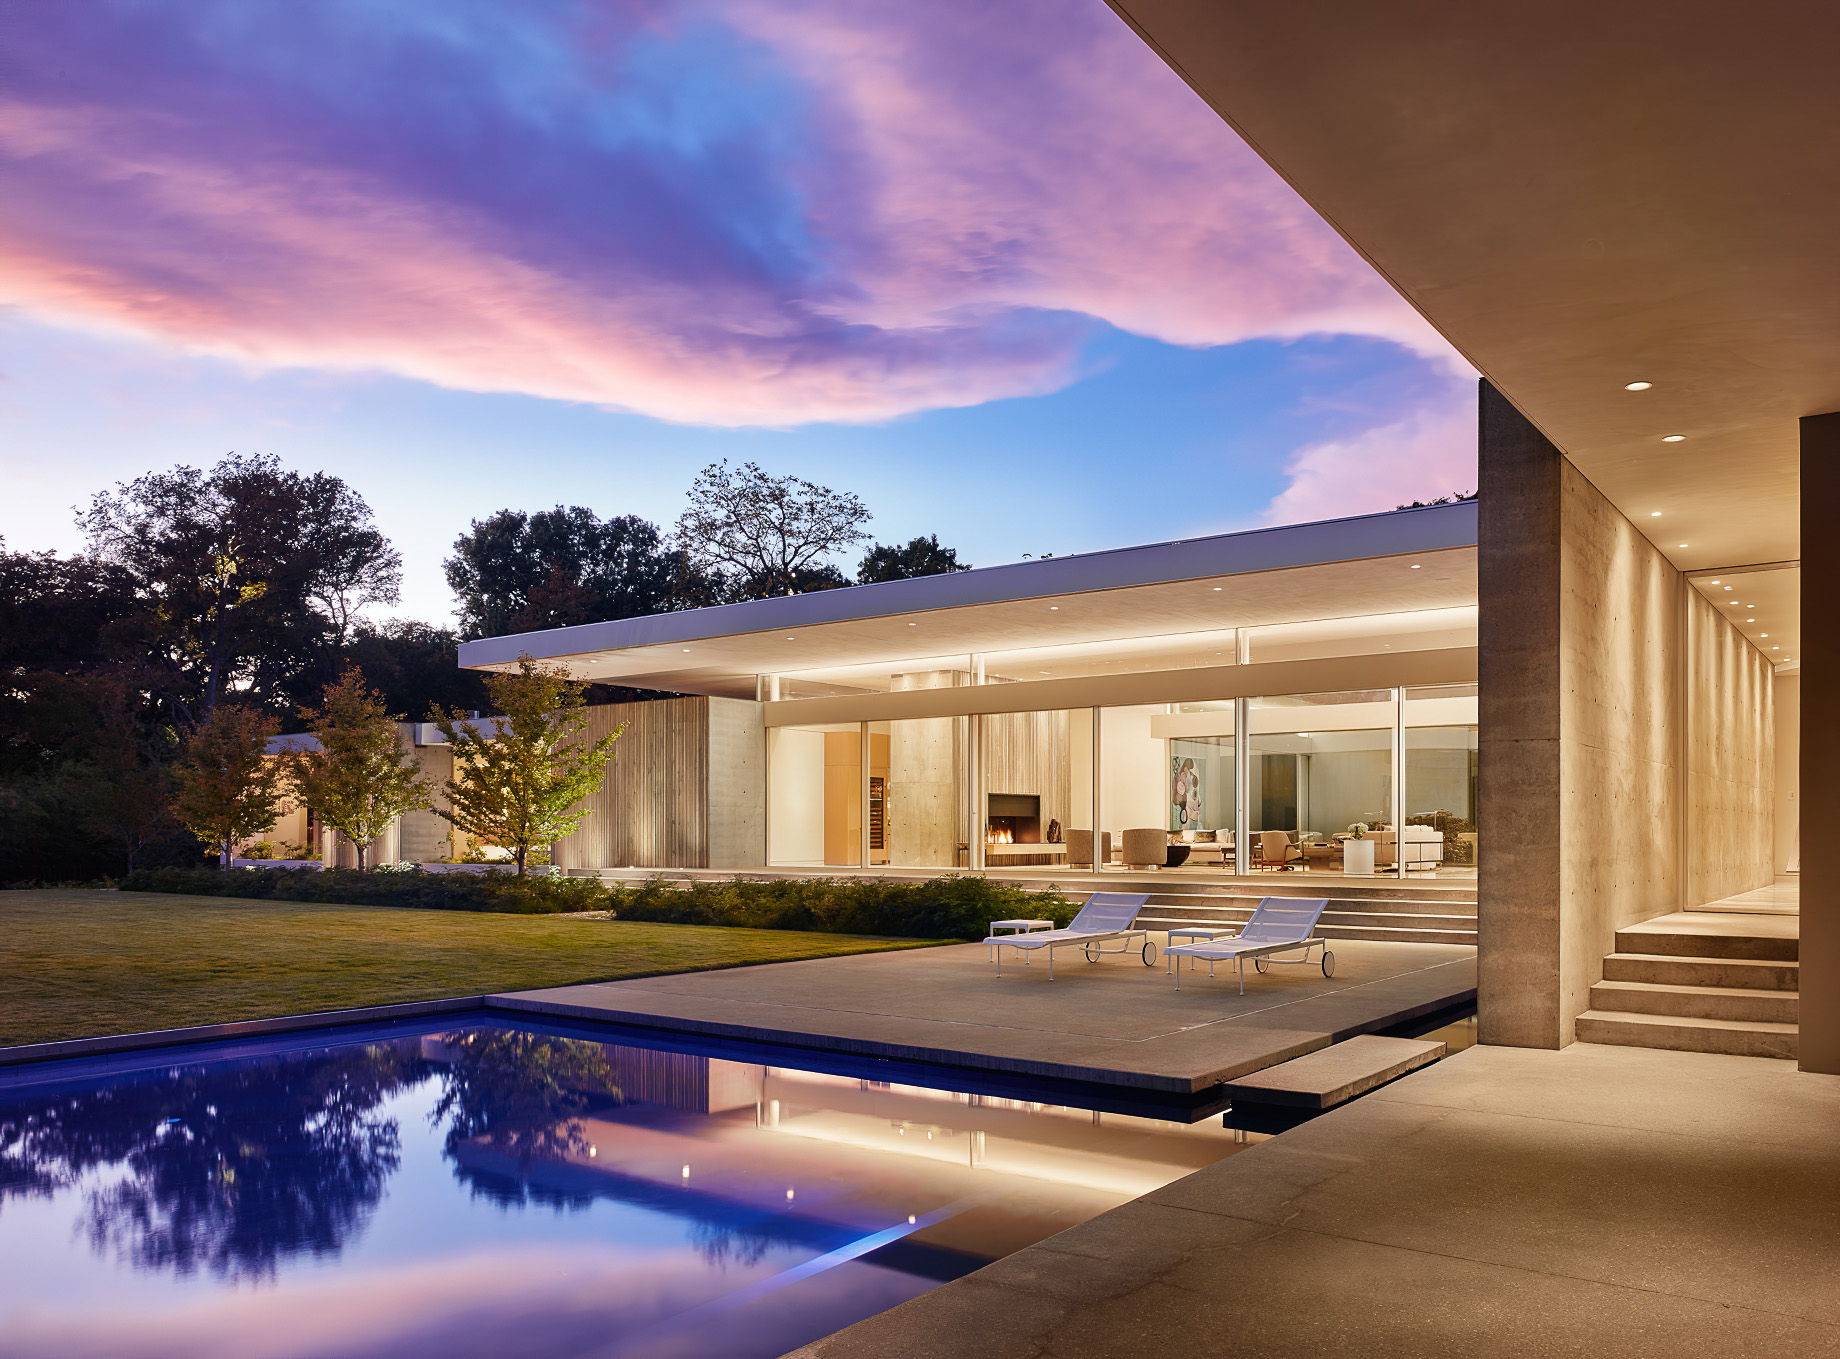 028 – Preston Hollow Brutalist Architecture Residence – Dallas, TX, USA – Sunset Exterior View